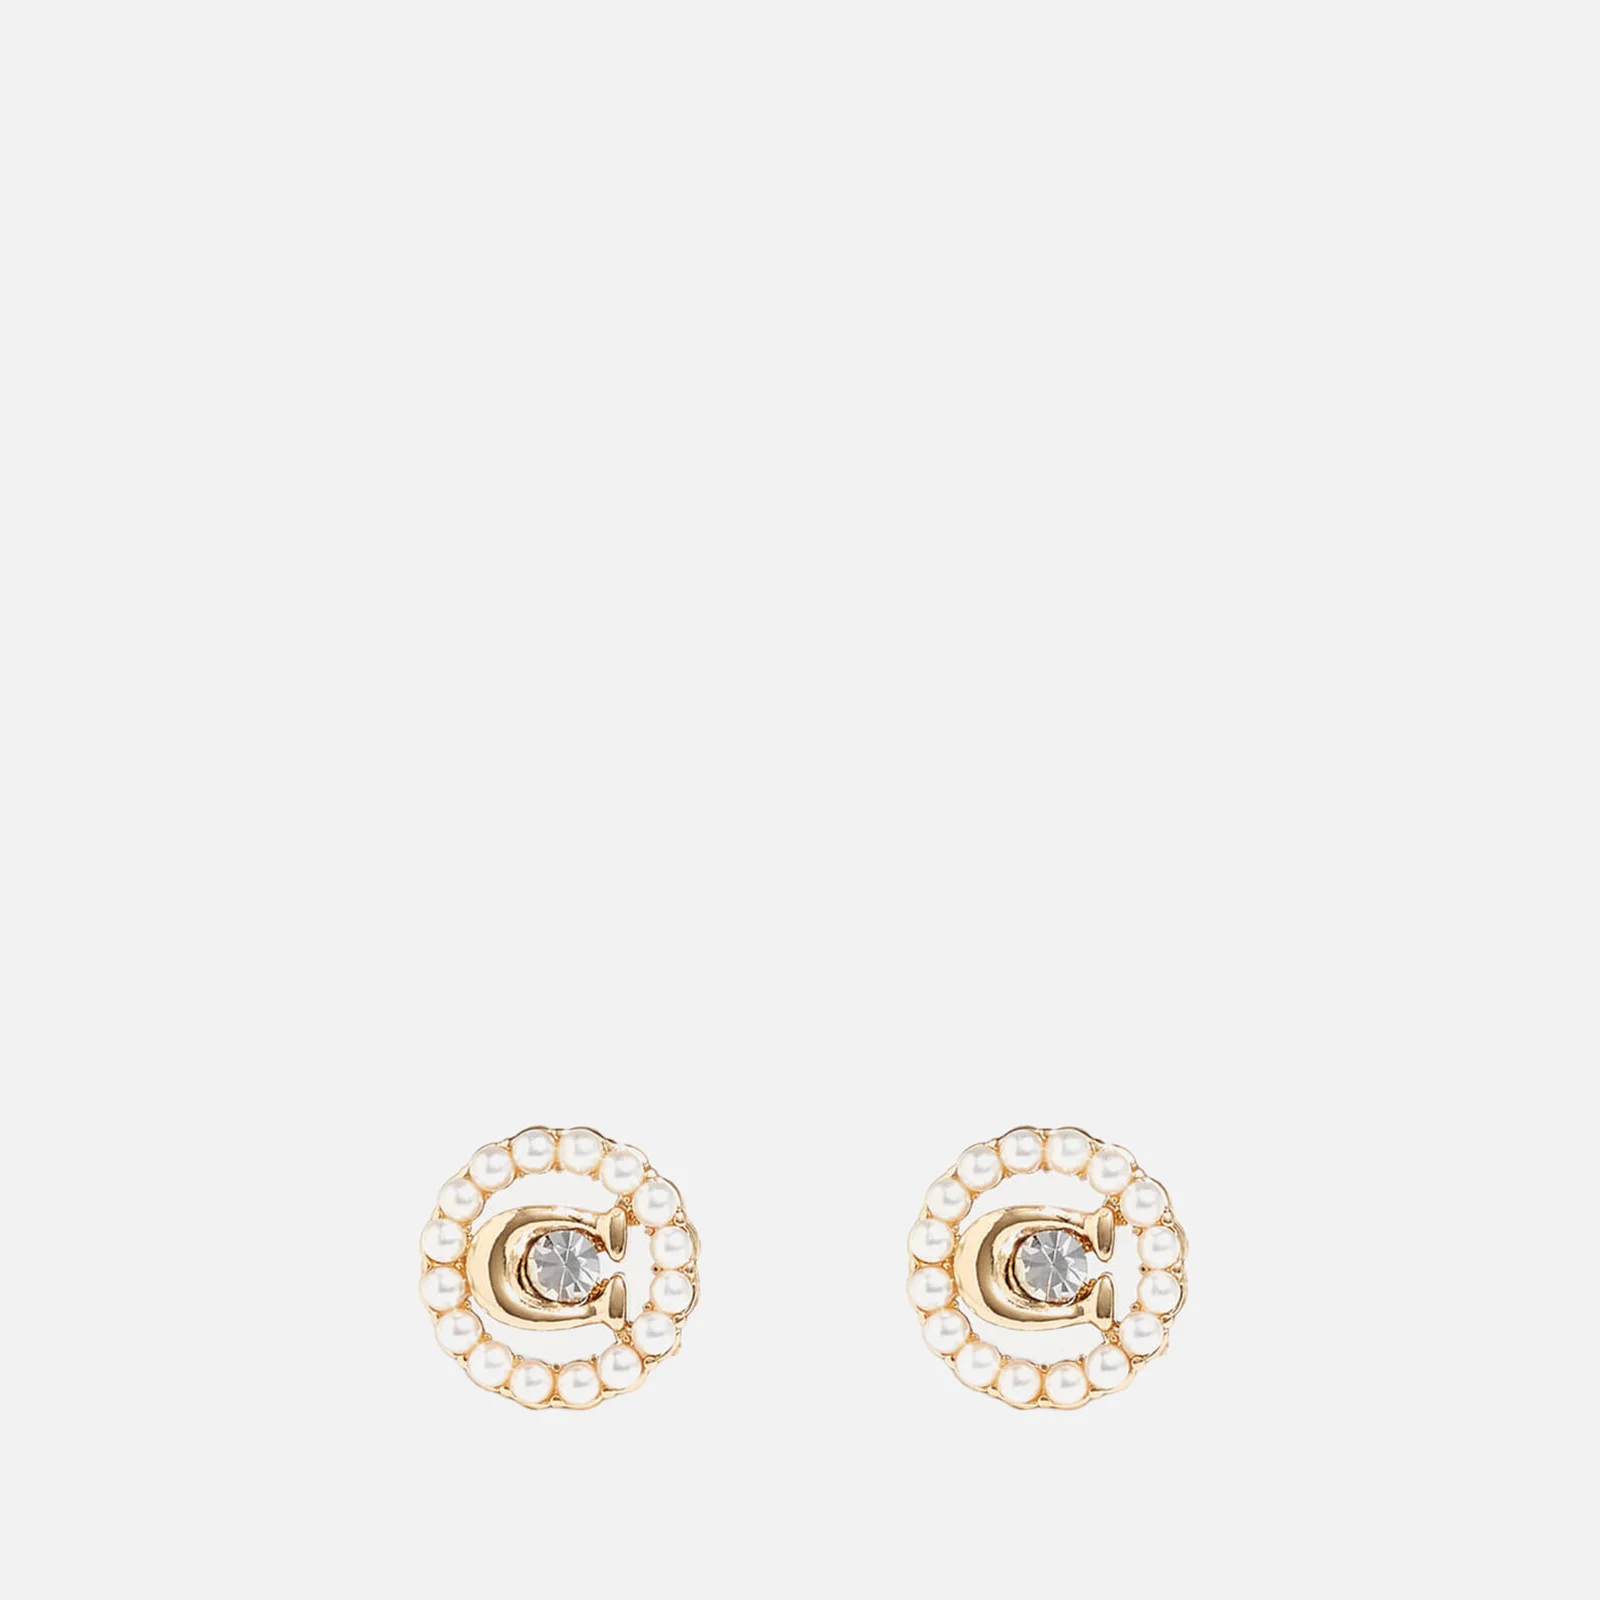 Coach C Gold-Plated Crystal and Faux Pearl Stud Earrings Image 1